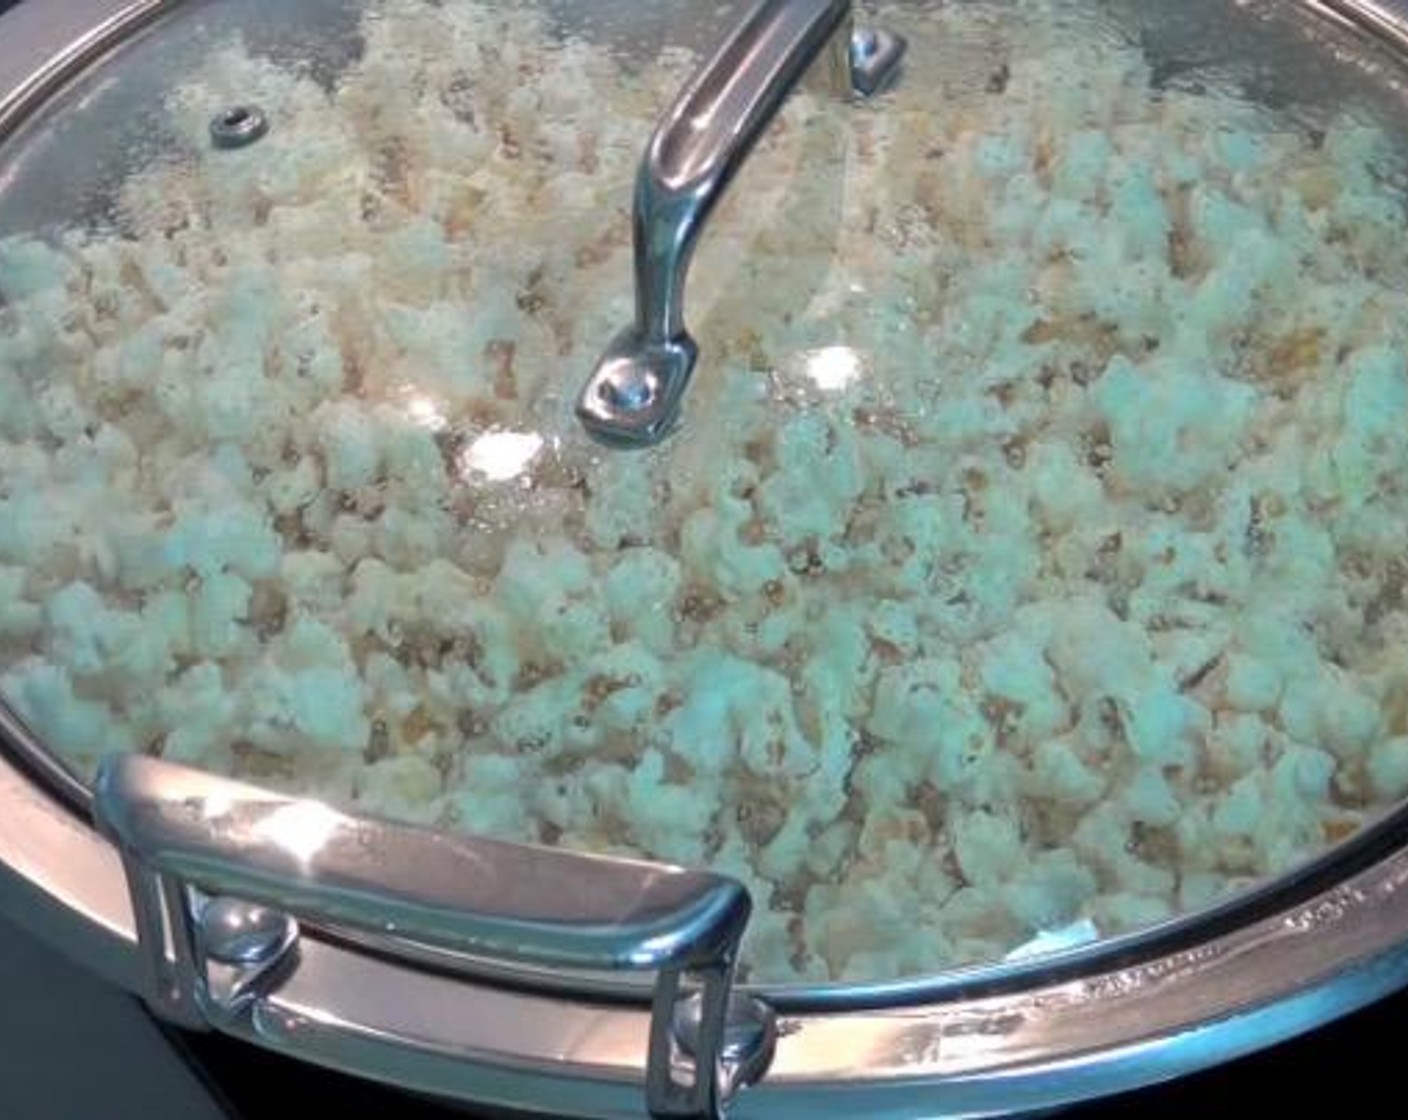 step 1 In a large saucepan, heat Vegetable Oil (1/4 cup) over medium heat. Place a few kernels of the Popcorn Kernels (1/2 cup) into the oil. When they begin to sizzle and pop, pour in the rest. Cover and cook until popping slows down. Transfer to large bowl.